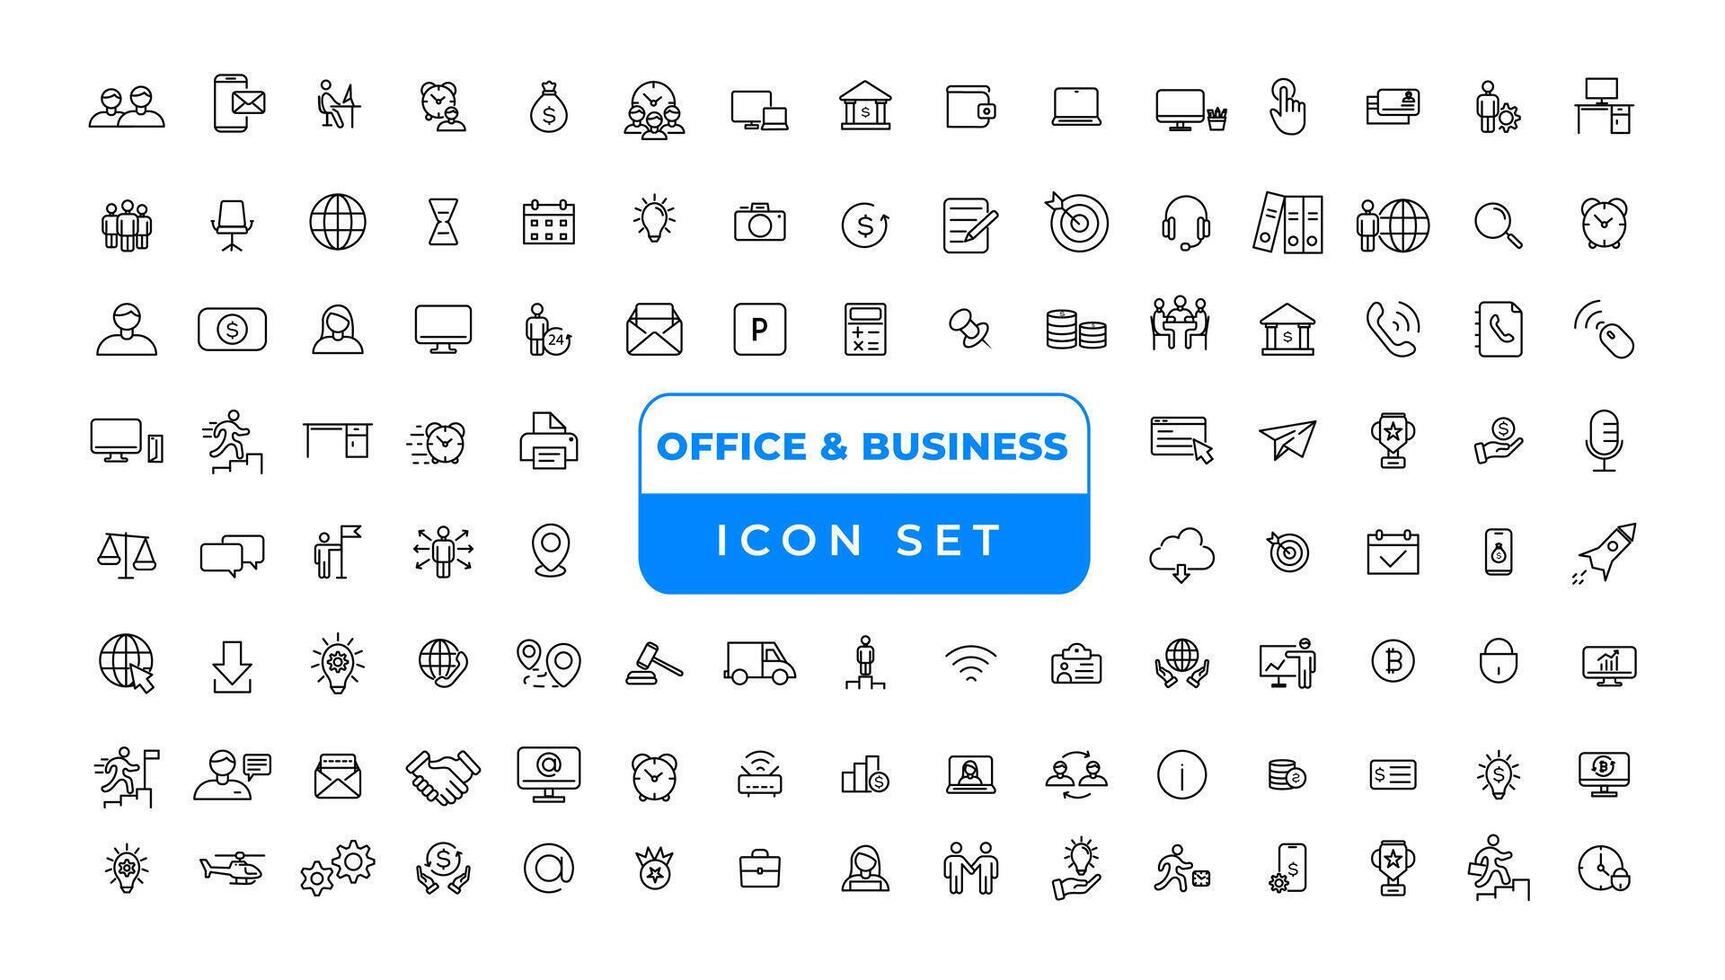 Office and Business thin line web icons. Outline icons collection. Business, Marketing, Banking, SEO, Teamwork and other symbols. Office management sumbols. vector